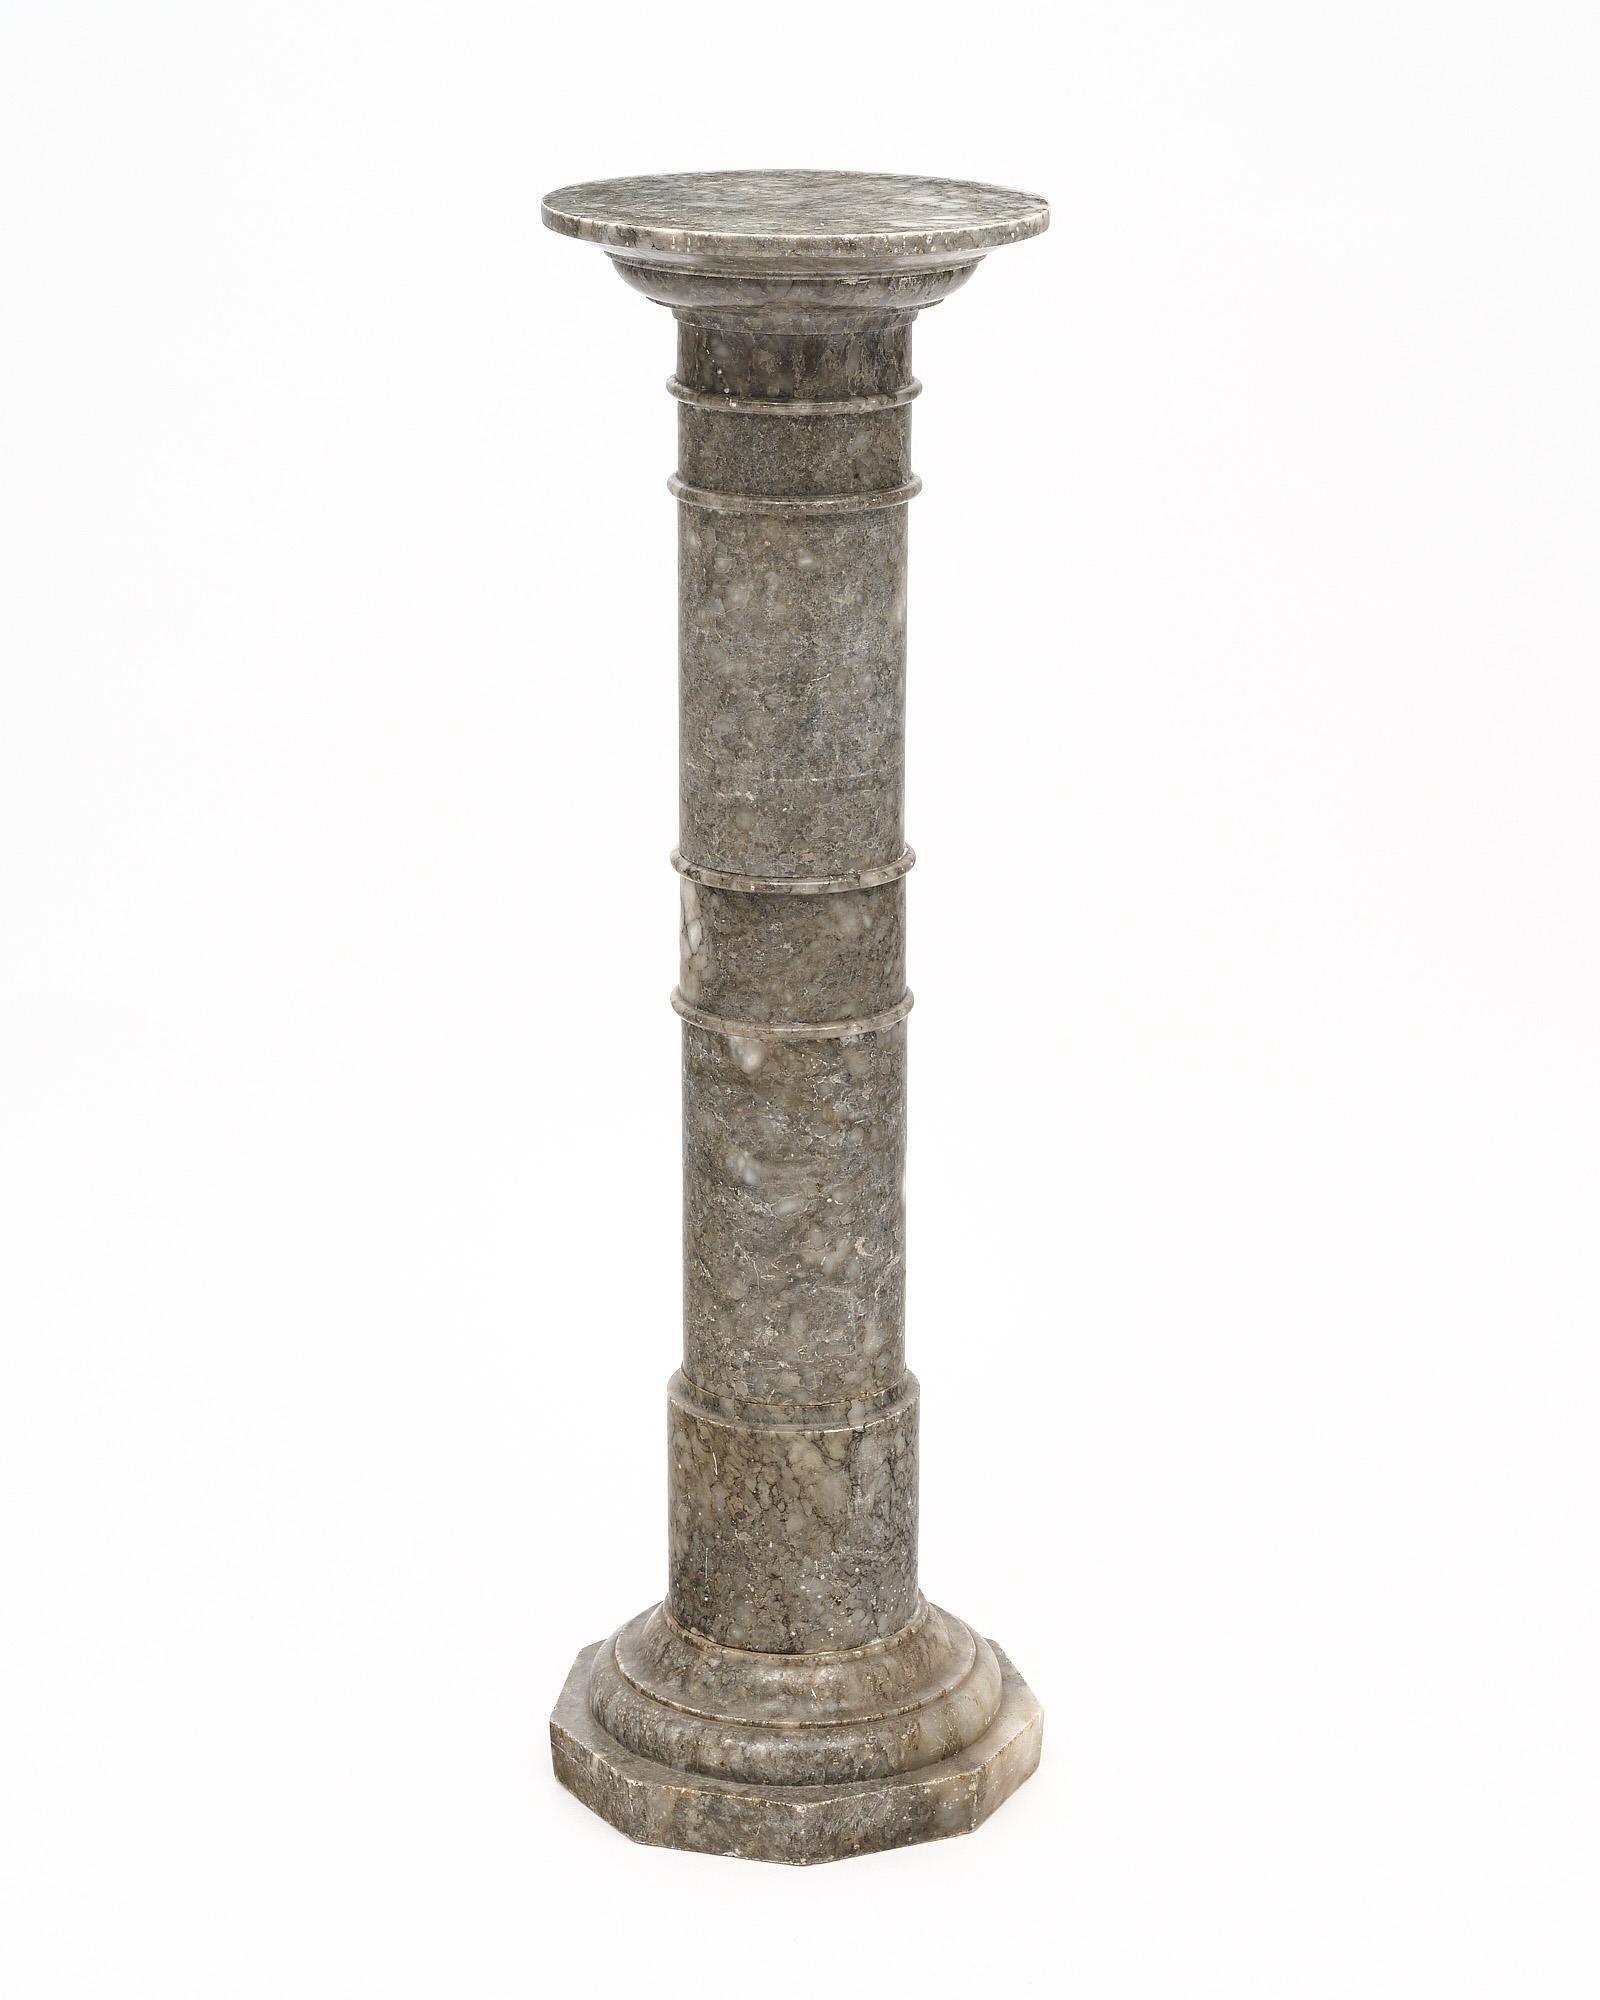 Marble column, French, from the Empire period. It is made of gray “Turquin” marble.
